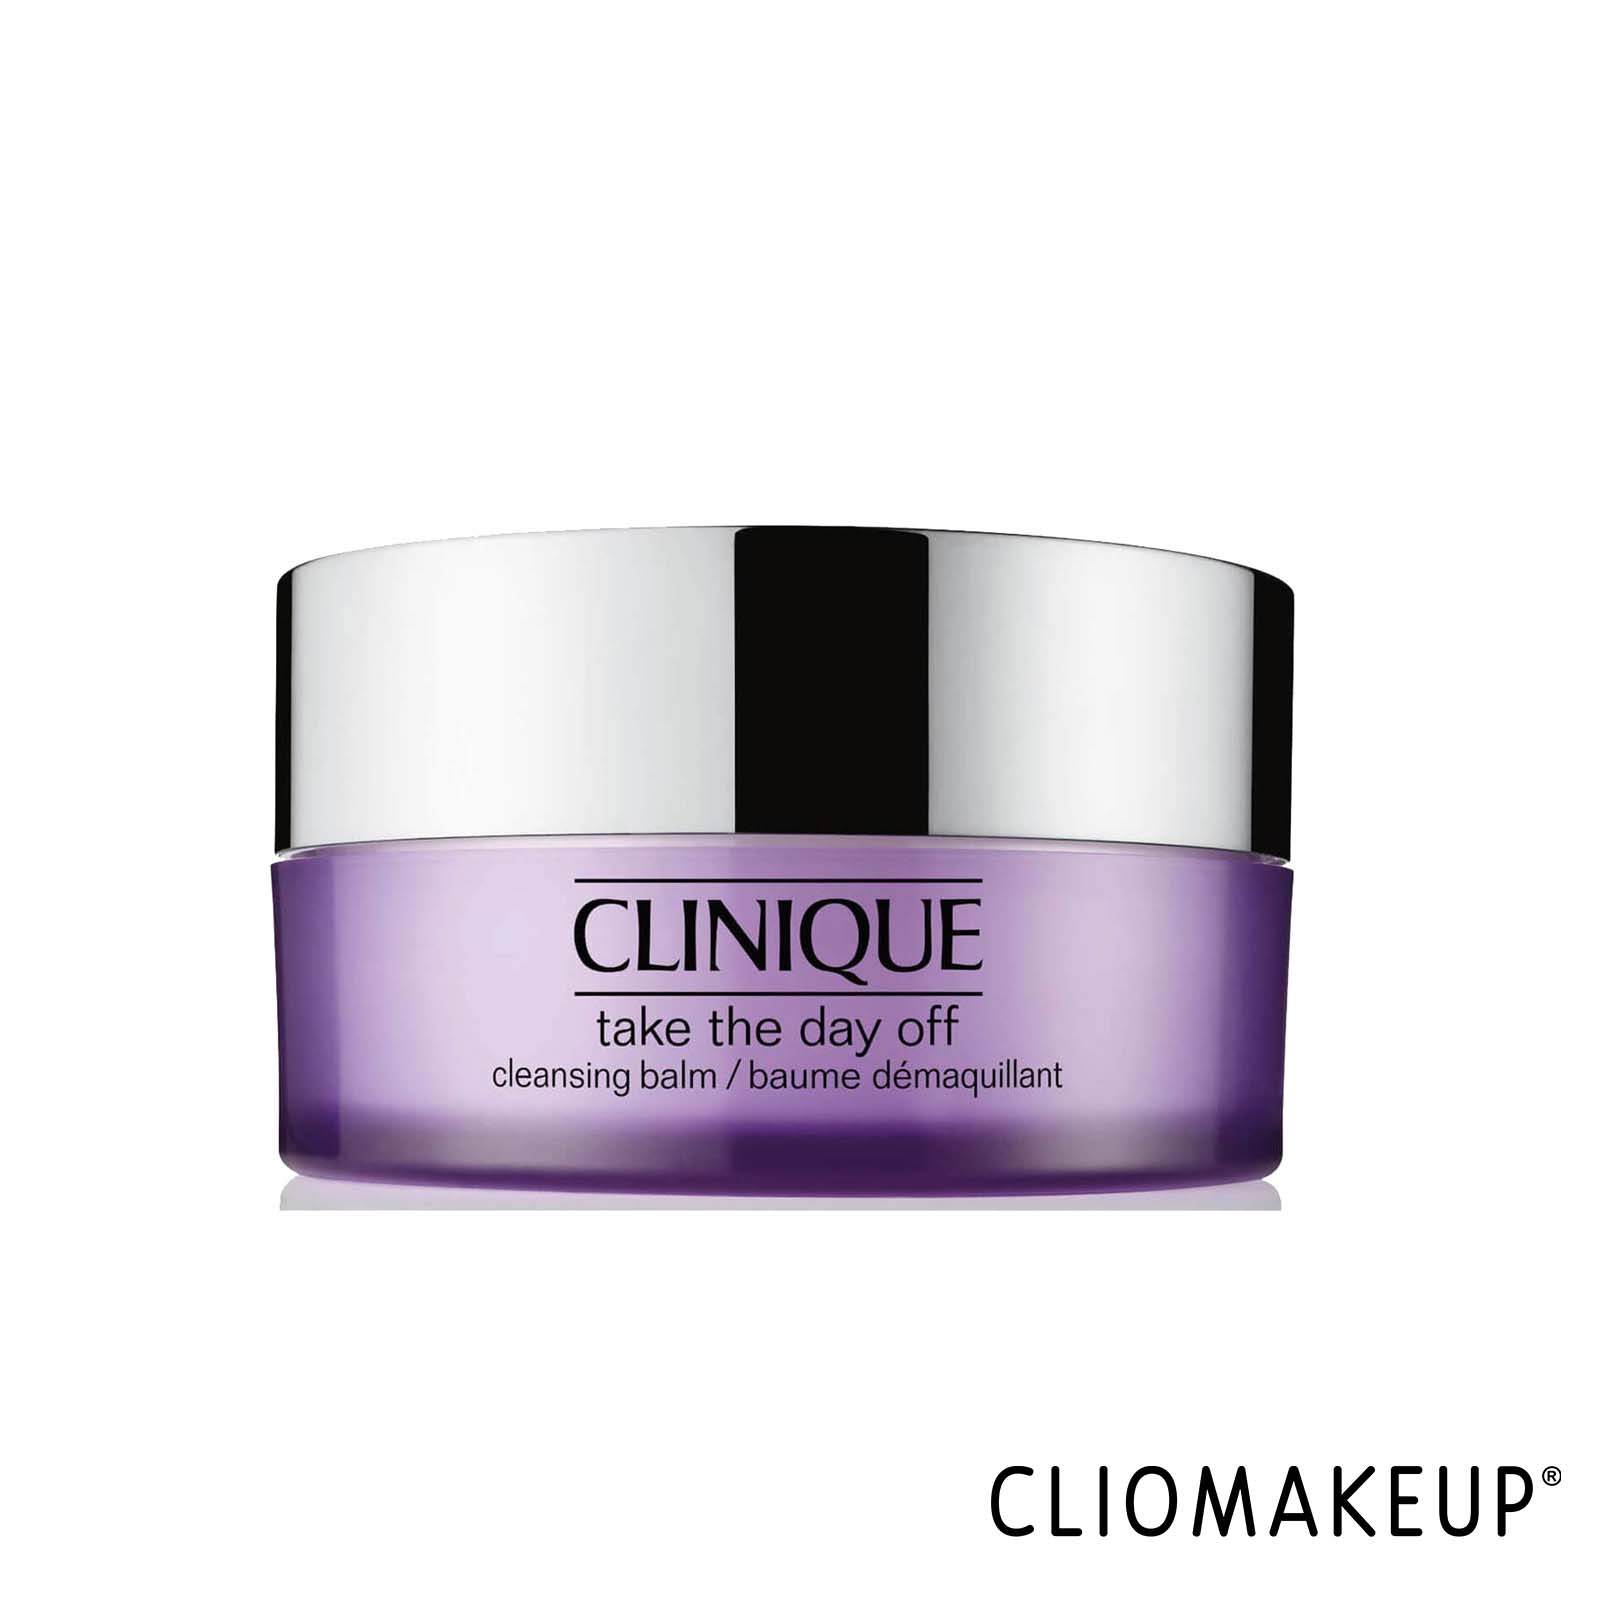 Clinique Take The Day Off Cleansing Balm Makeup Removing Butter Review